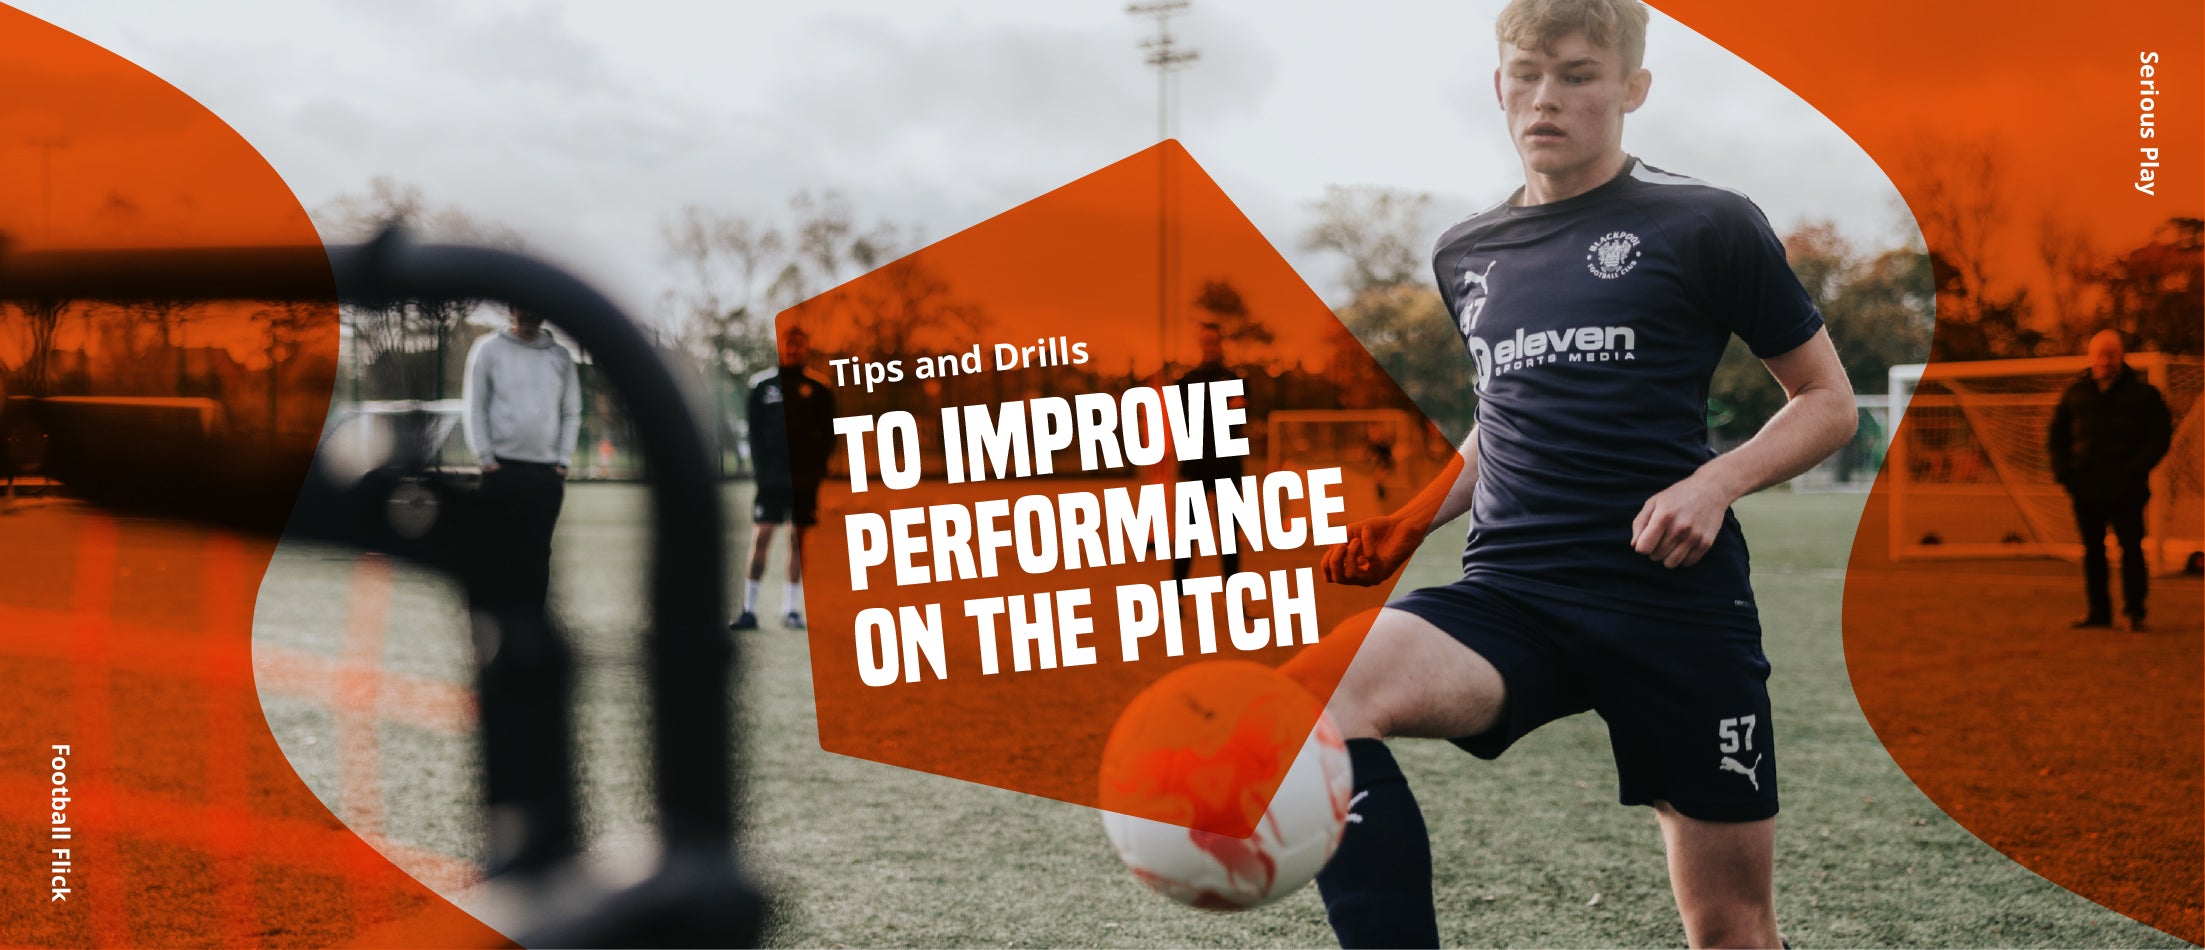 6 Training tips and drills to improve performance on the pitch